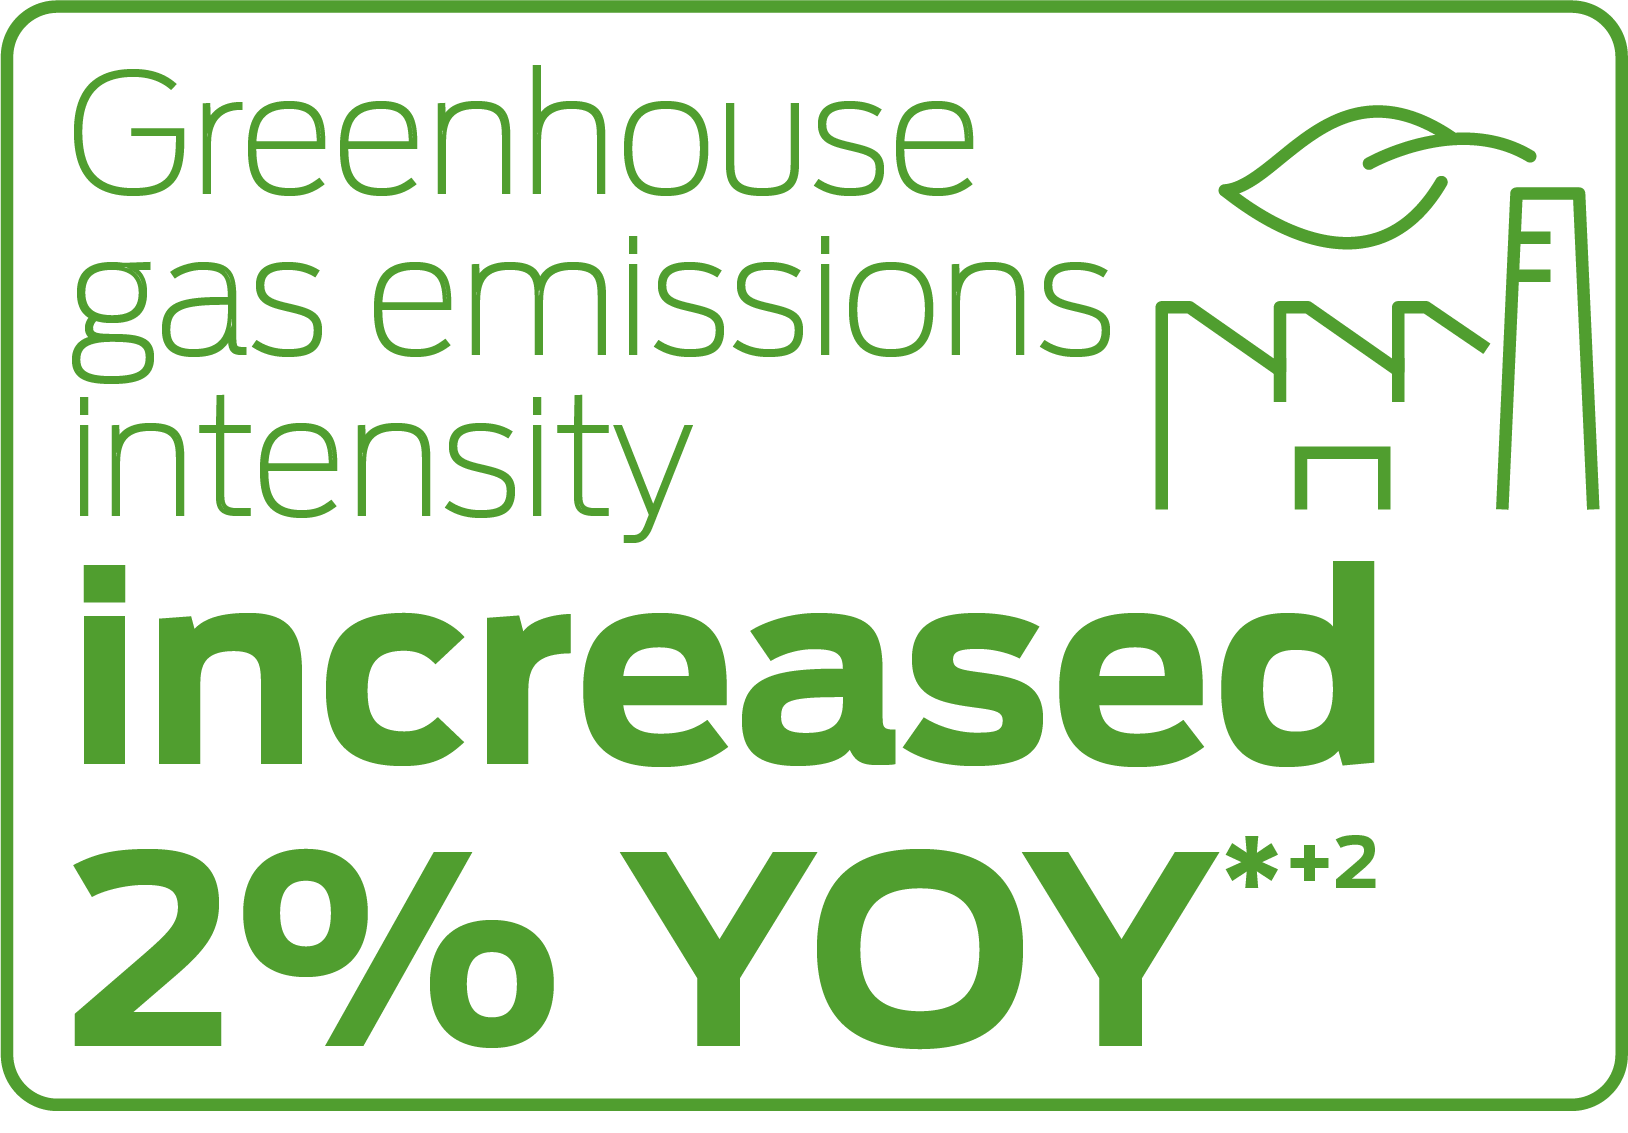 Greenhouse gas emissions intensity increased 2% YOY